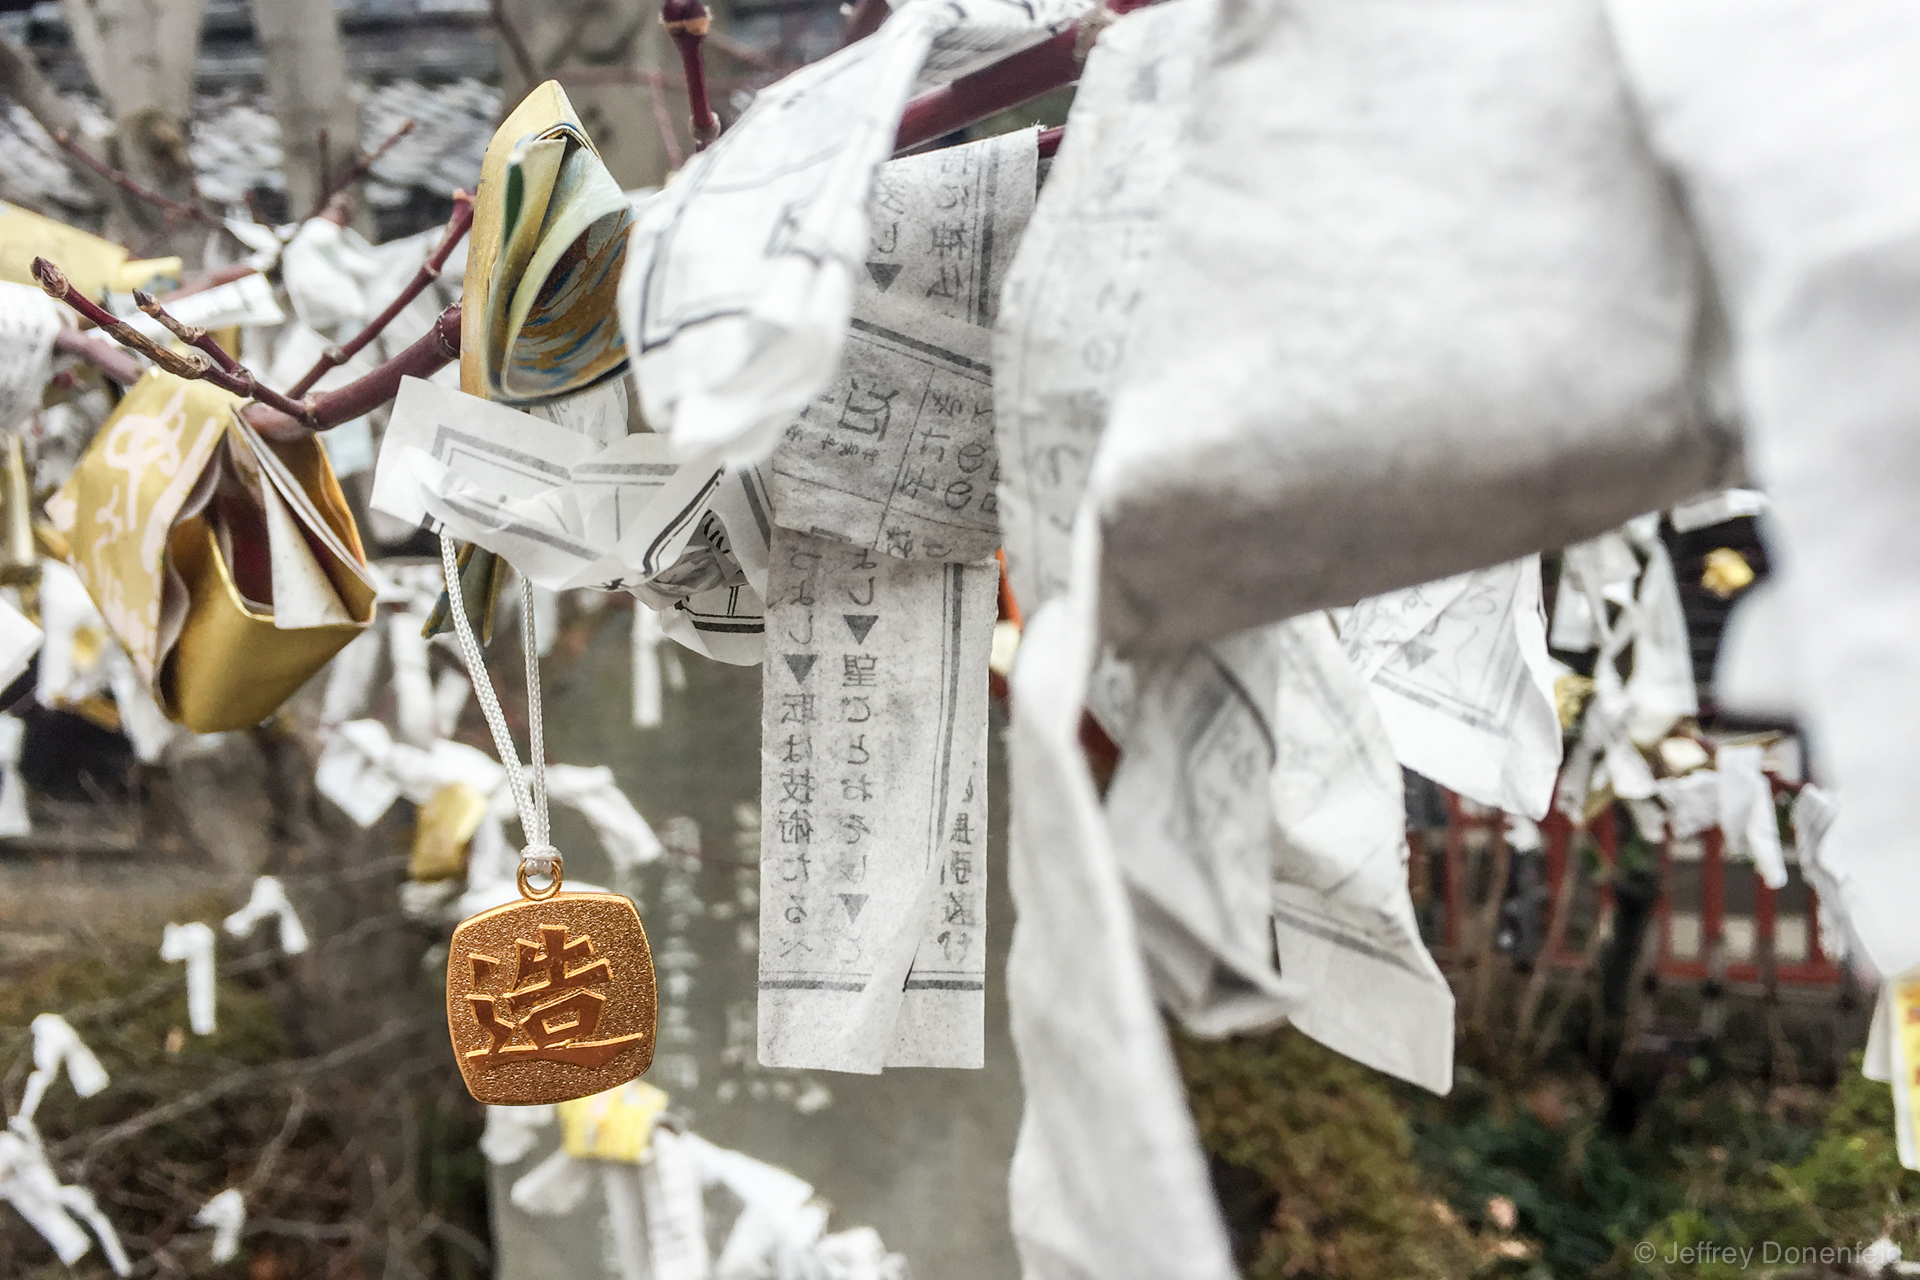 Coins and papers tied to a tree for luck at the Zenkoji Temple, Nagano, Japan